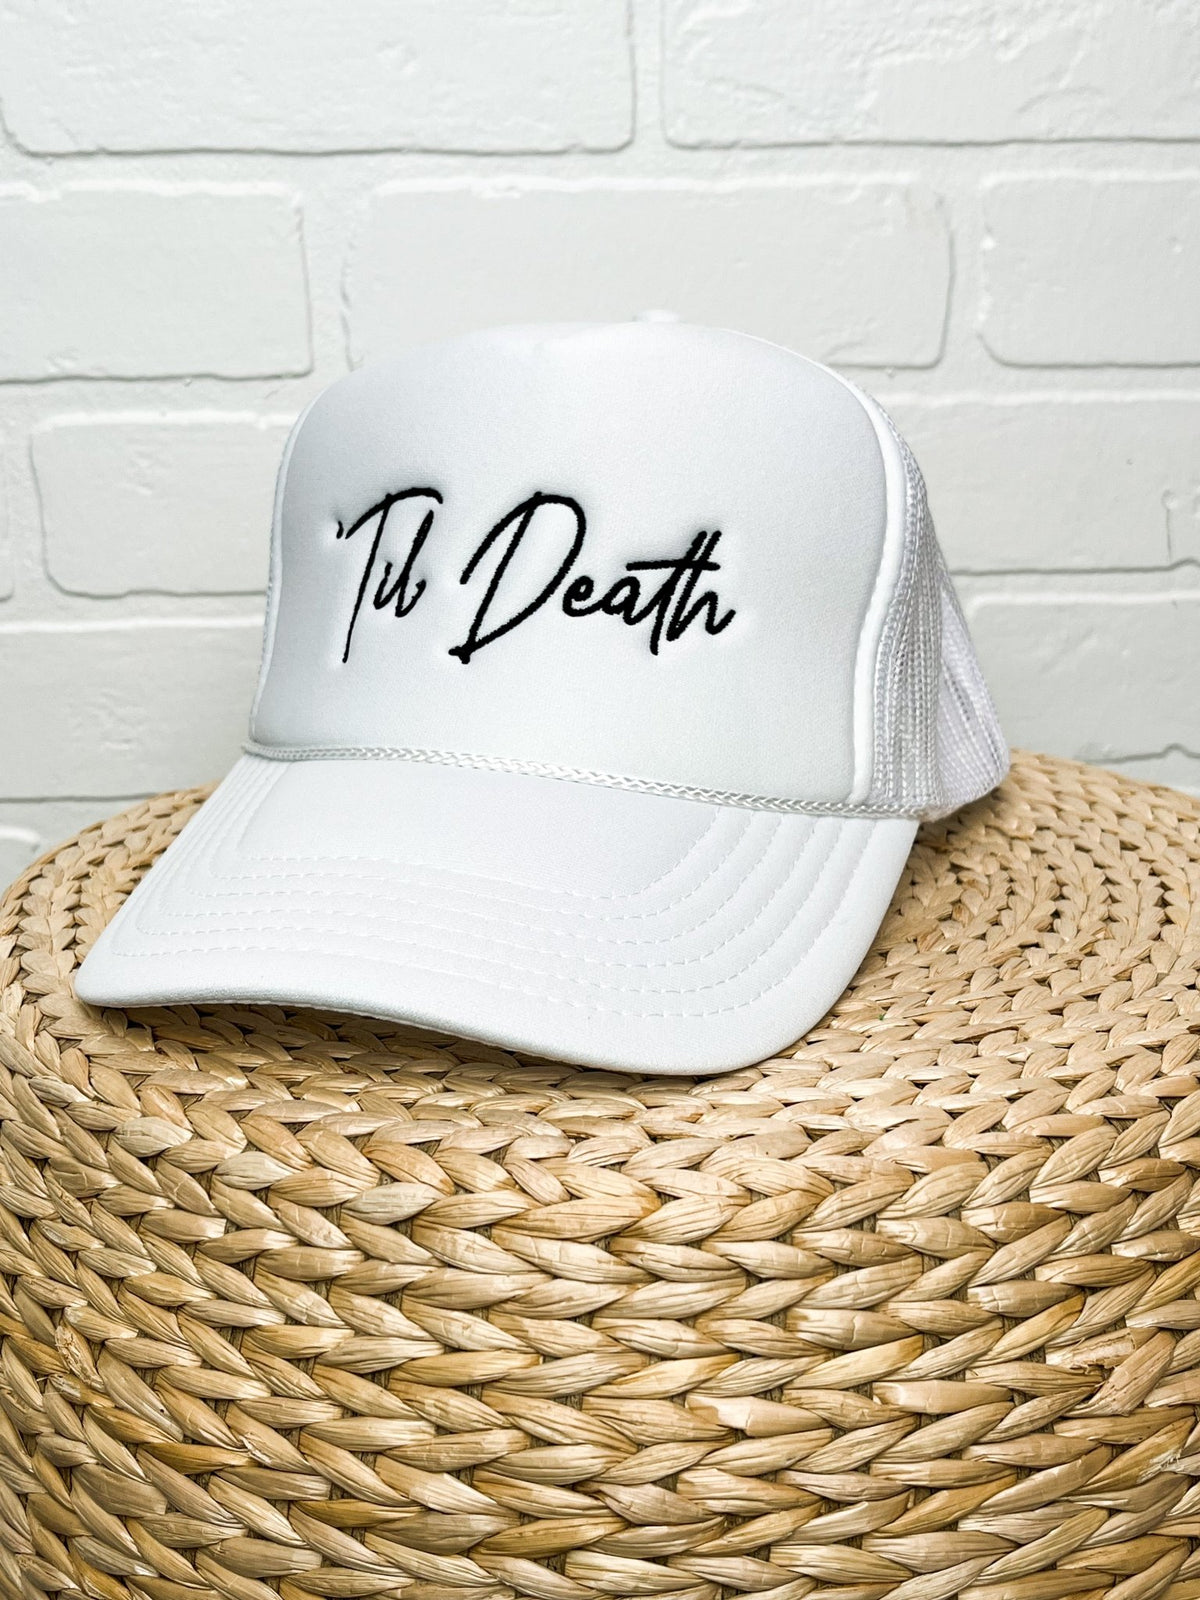 Til death trucker hat white - Stylish Hat -  Cute Bridal Collection at Lush Fashion Lounge Boutique in Oklahoma City